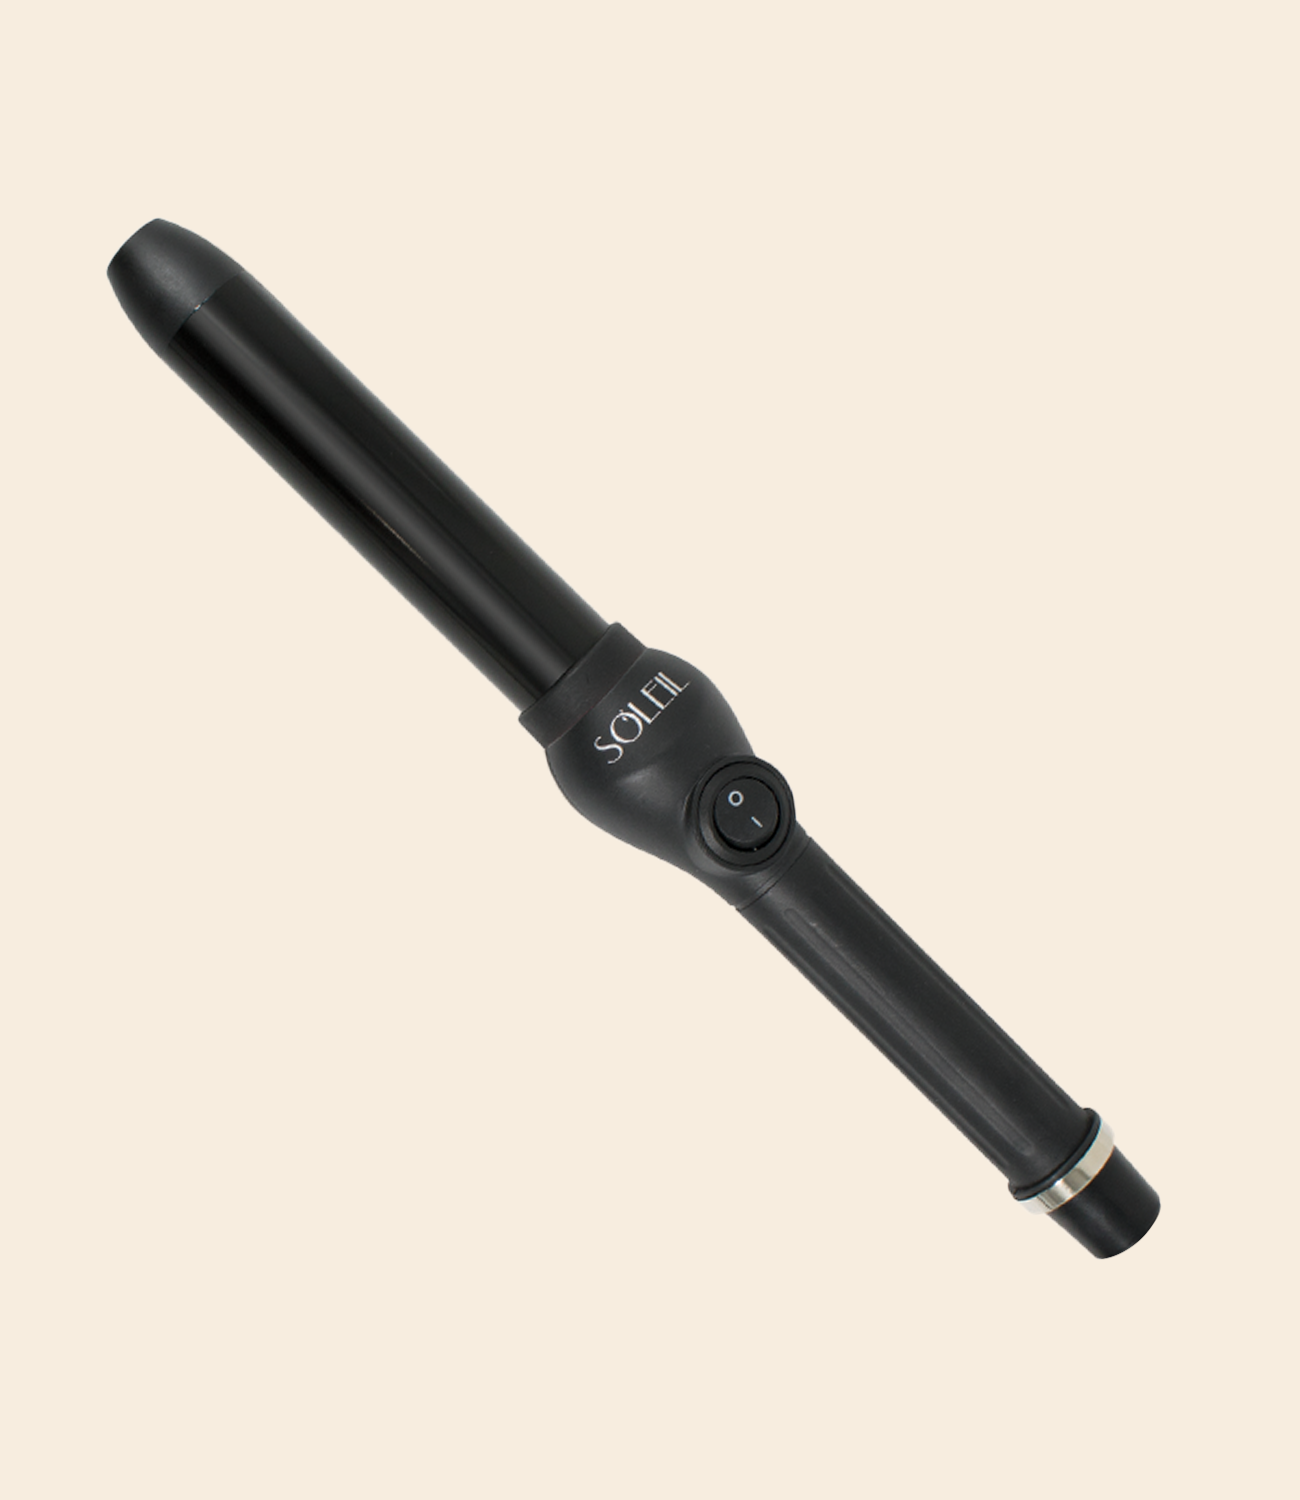 soleil black curling iron with one power button, black barrel with 32mm, silver details against a light beige background